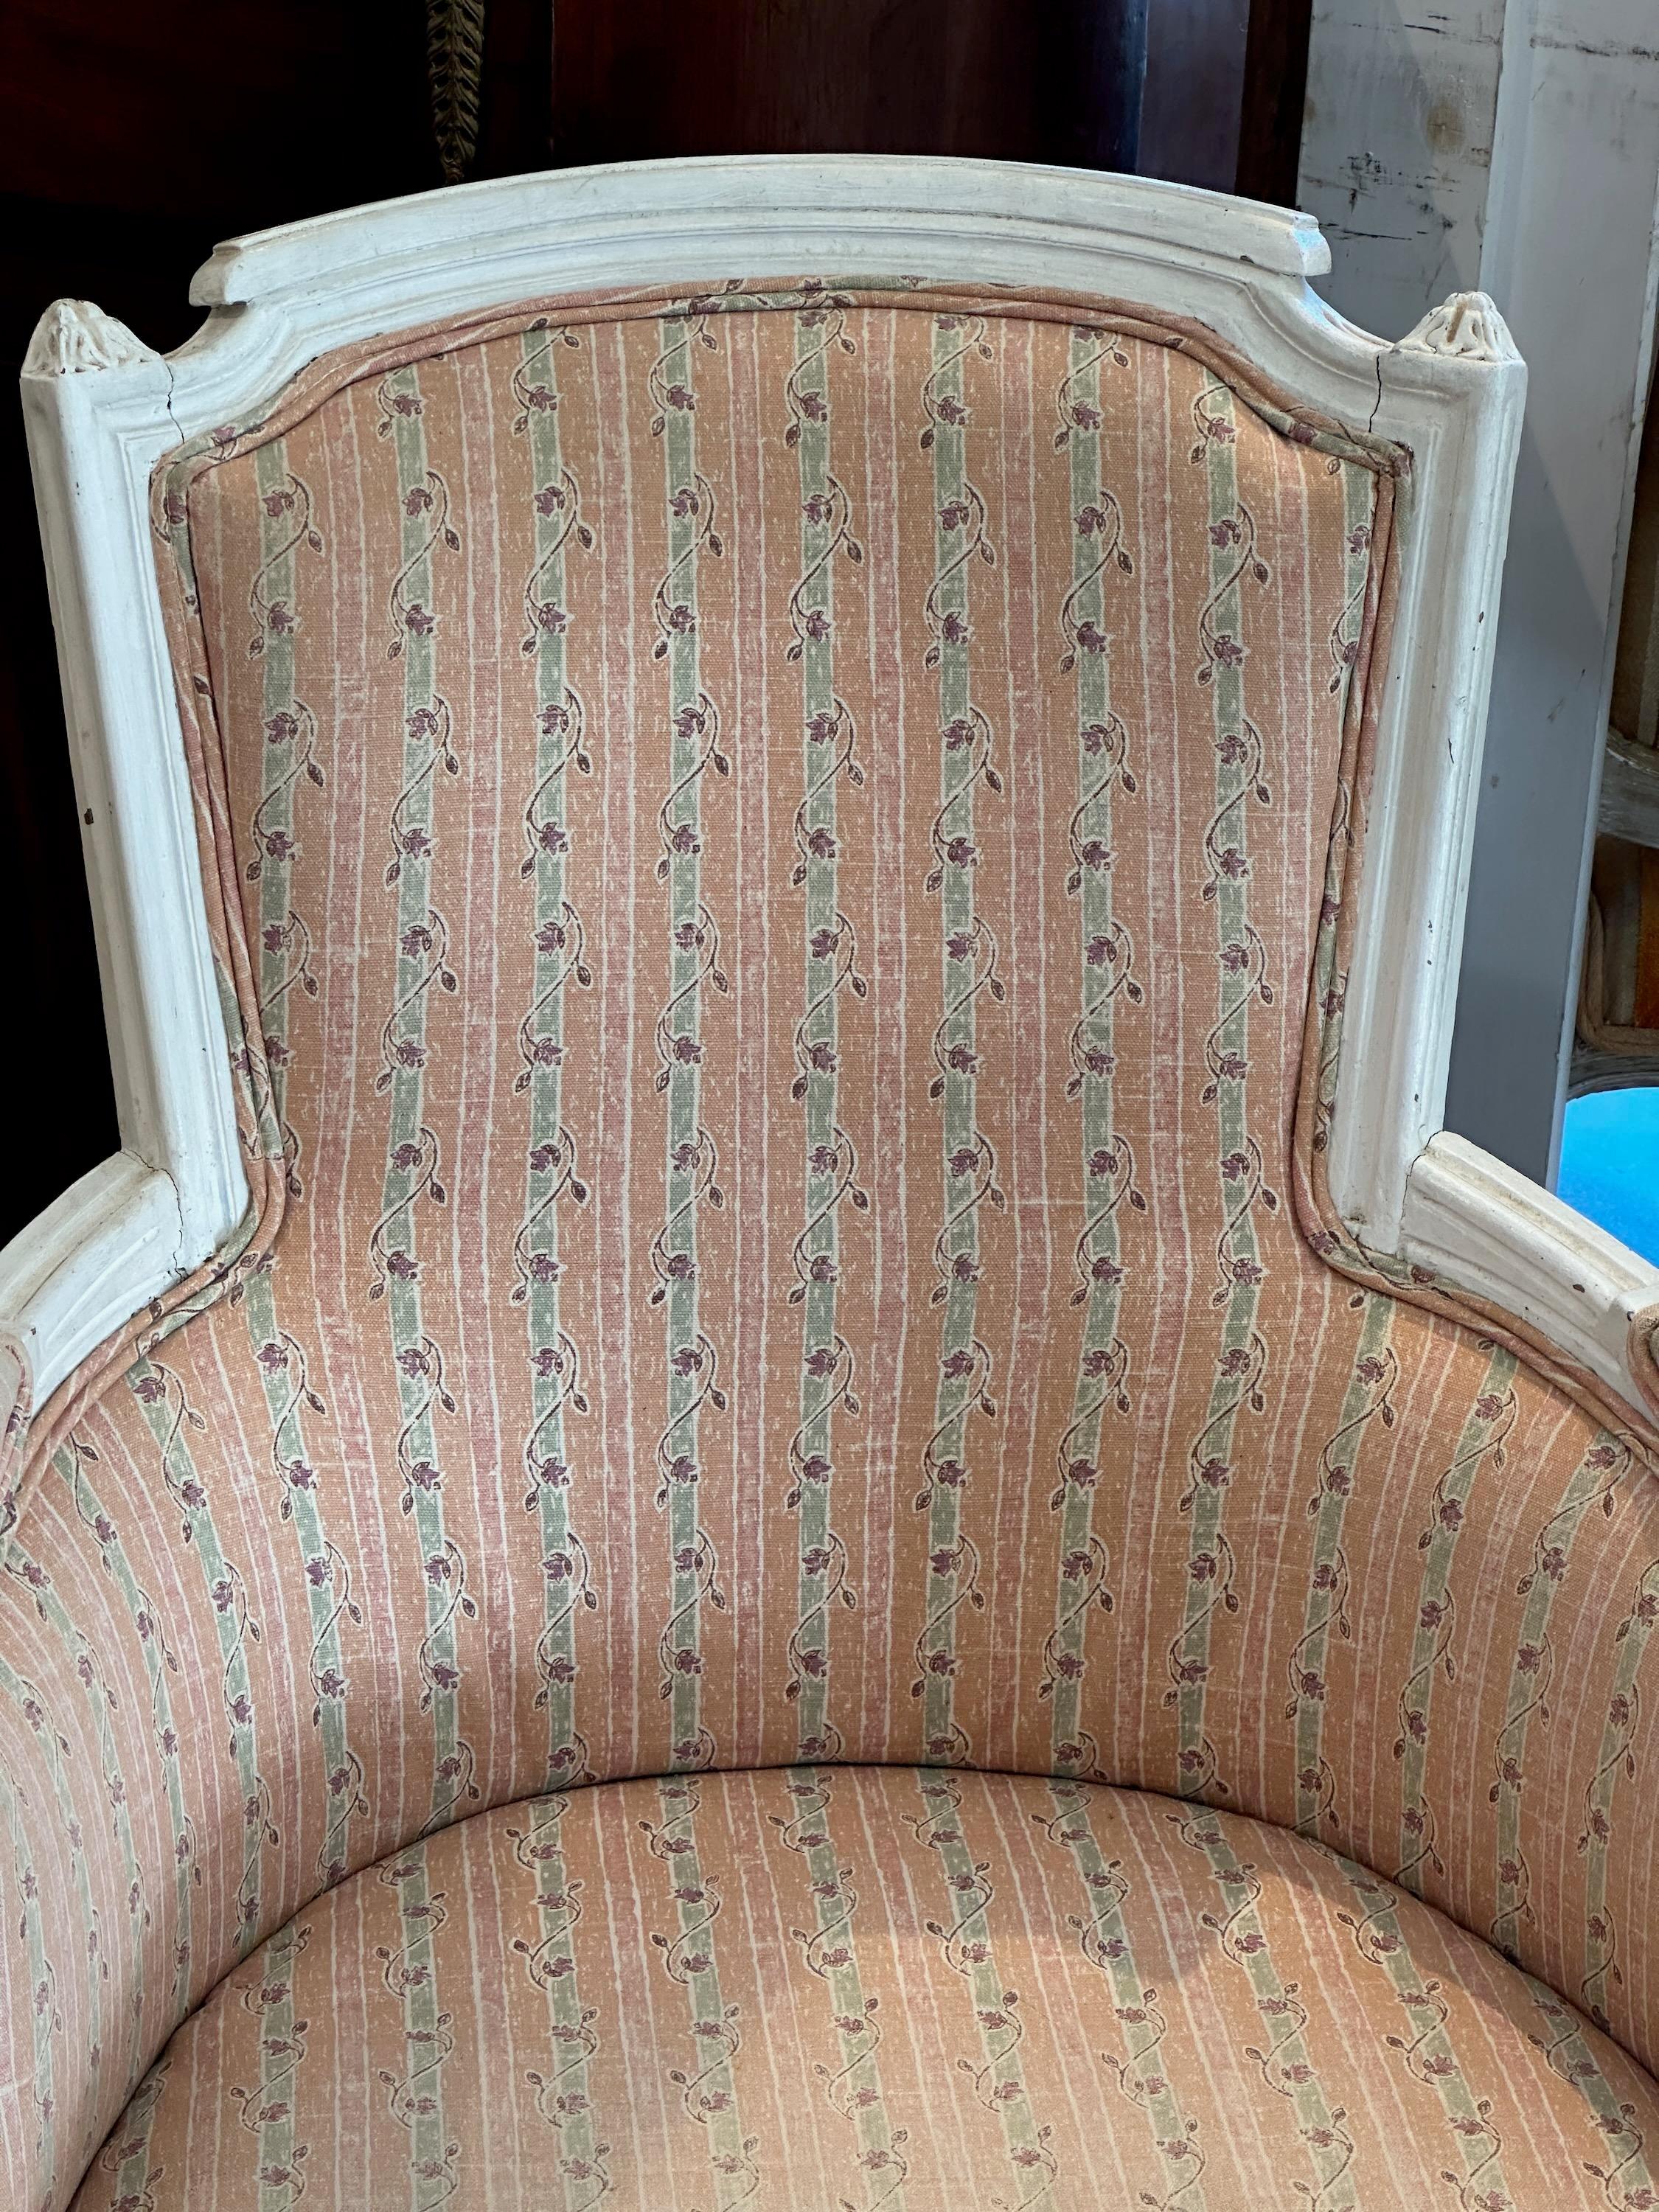 Early 20th Century French Bergere Chair In Good Condition For Sale In Charlottesville, VA